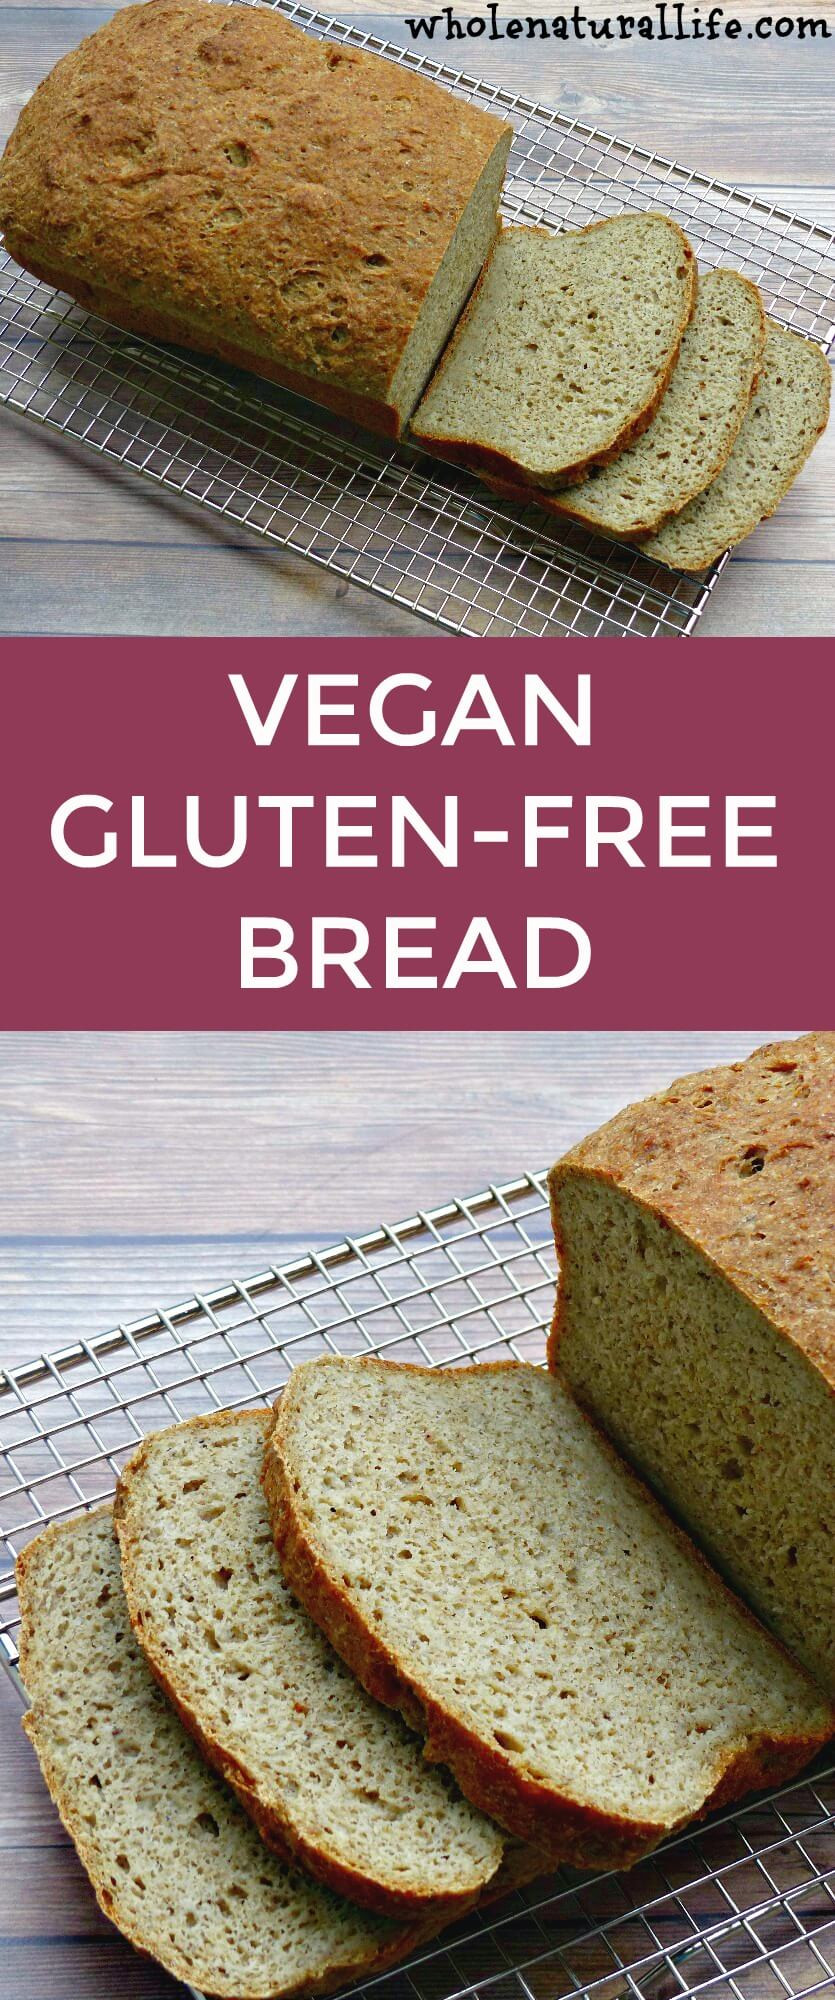 Gluten Dairy And Soy Free Recipes
 Vegan Gluten free Bread Whole Natural Life